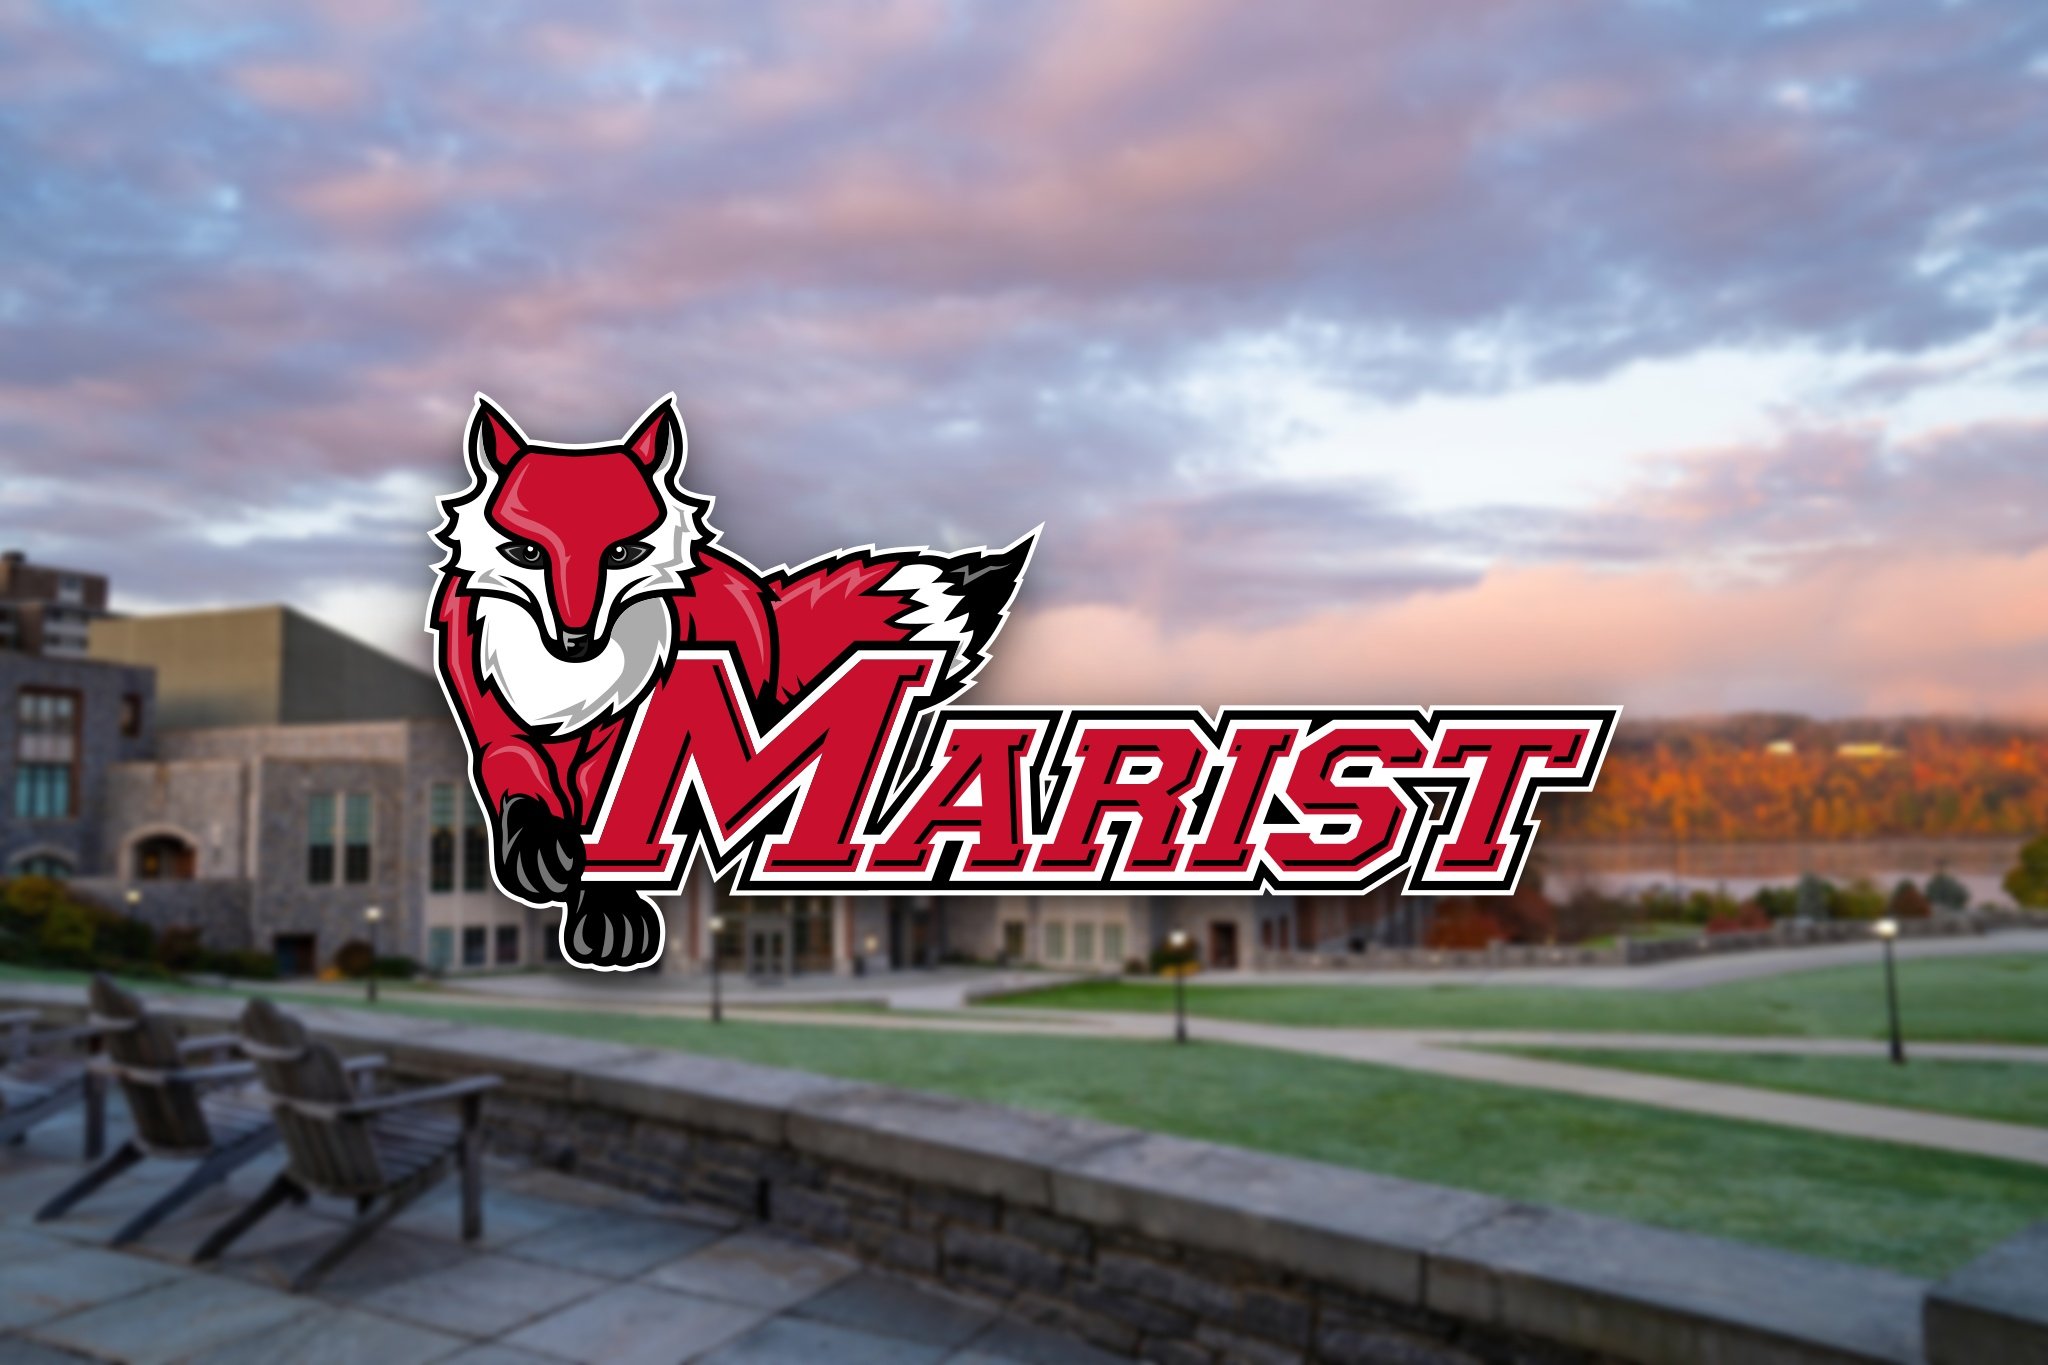 Marist college logo placed on photo